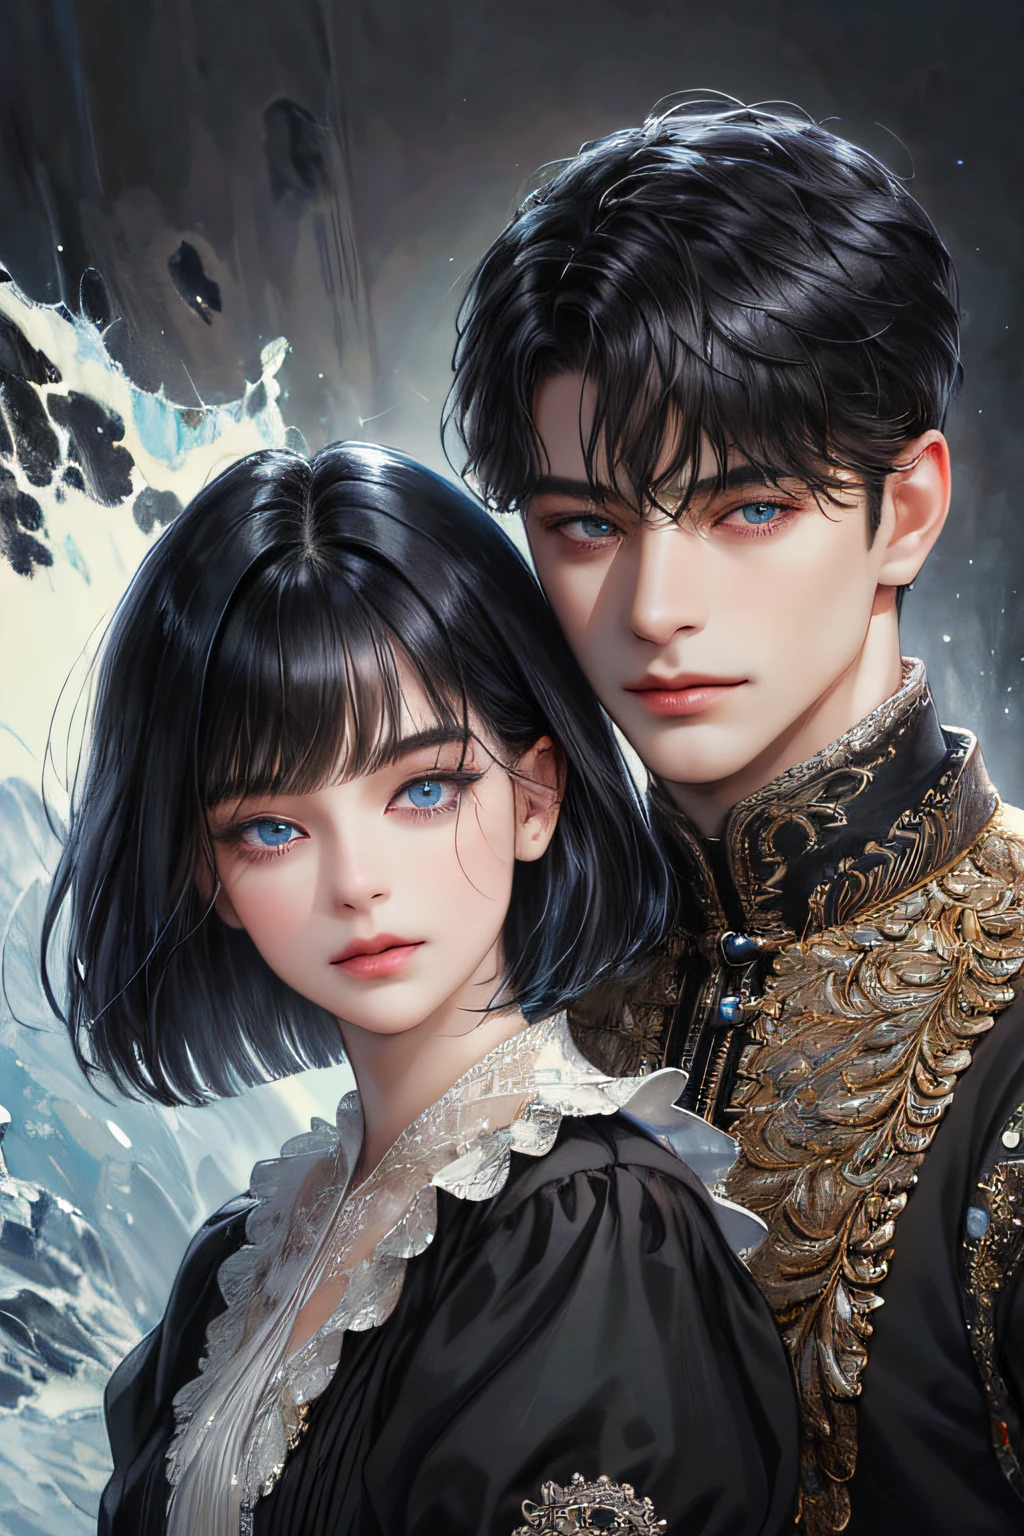 (absurdly , high quality , masterpiece , ultra detailed), ( detailed to hand ) (detailed to eyes) (detailed to face) , couples, 1 man (short black Quiff hair with Soft Fringe, bangs part on side 3:7 ratio) and 1 woman (short black hair with fringe) love ,pretty eyes (blue eyes) , black hair, fantasy, detailed background.